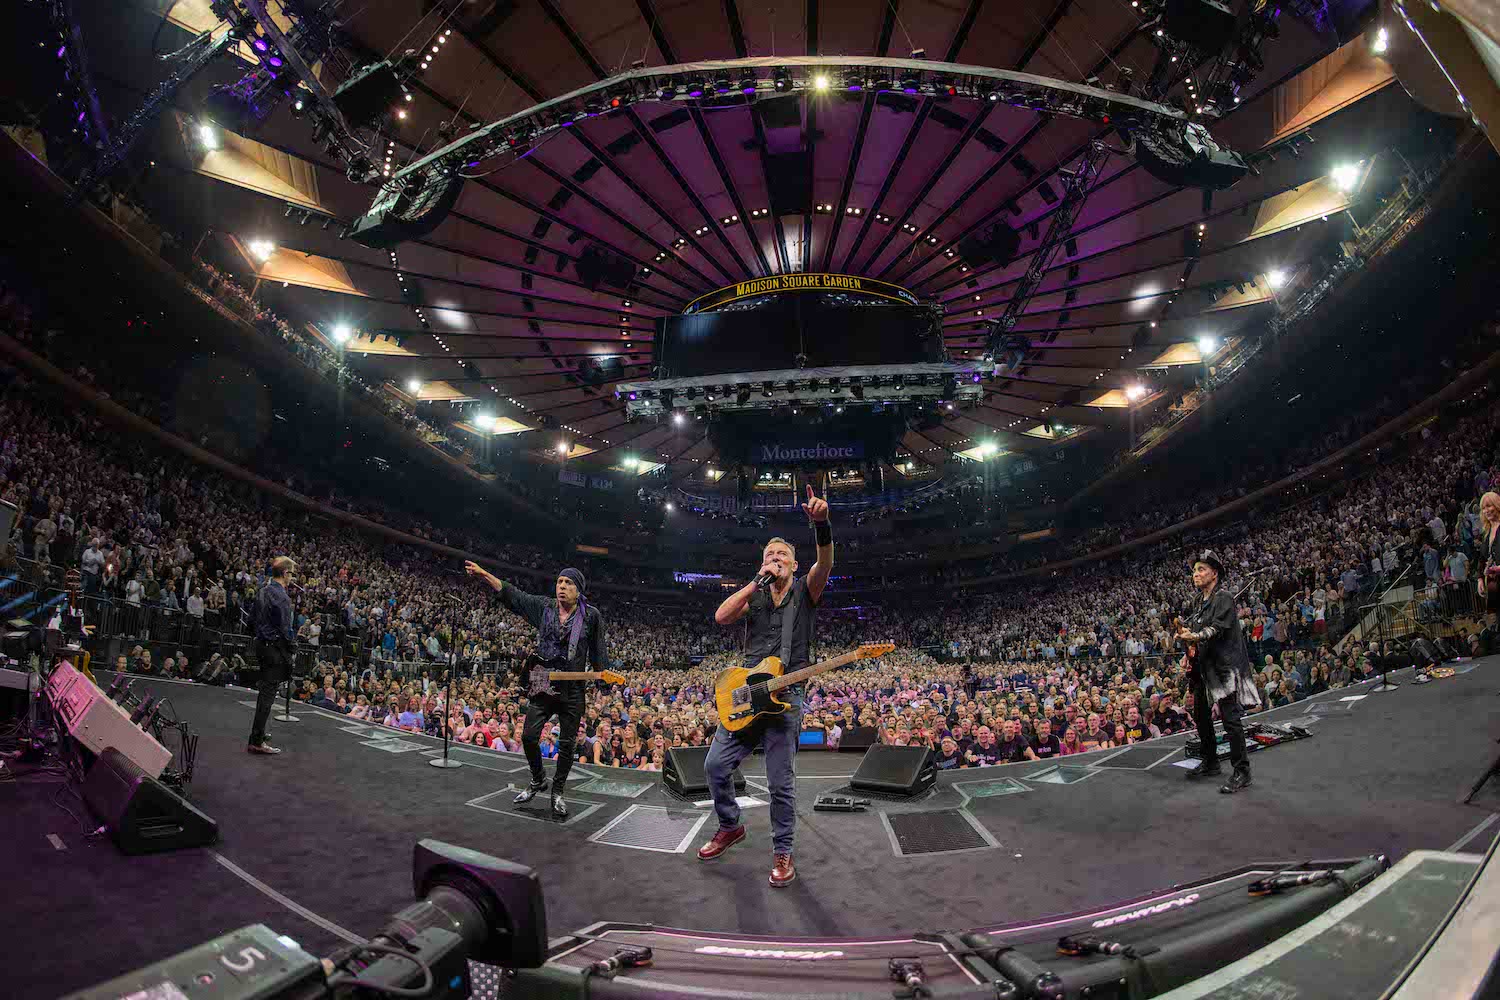 Bruce Springsteen & E Street Band at Madison Square Garden, New York, NY on April 1, 2023.